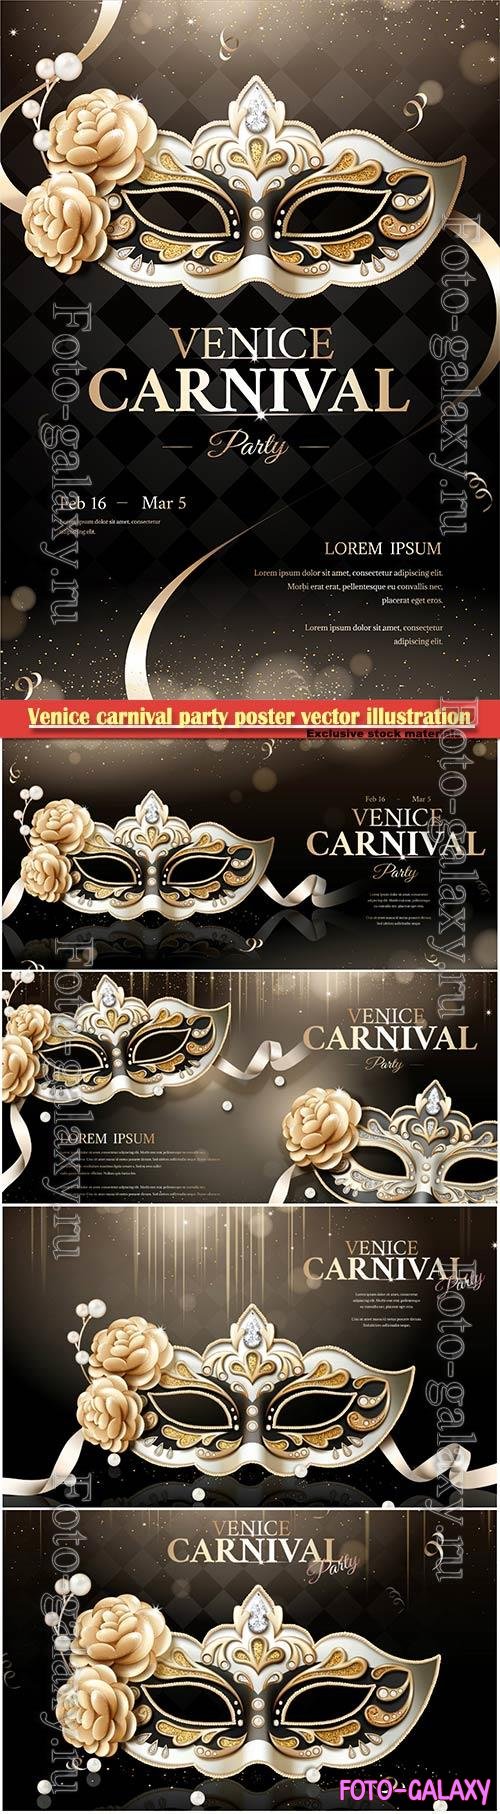 Venice carnival party poster vector illustration